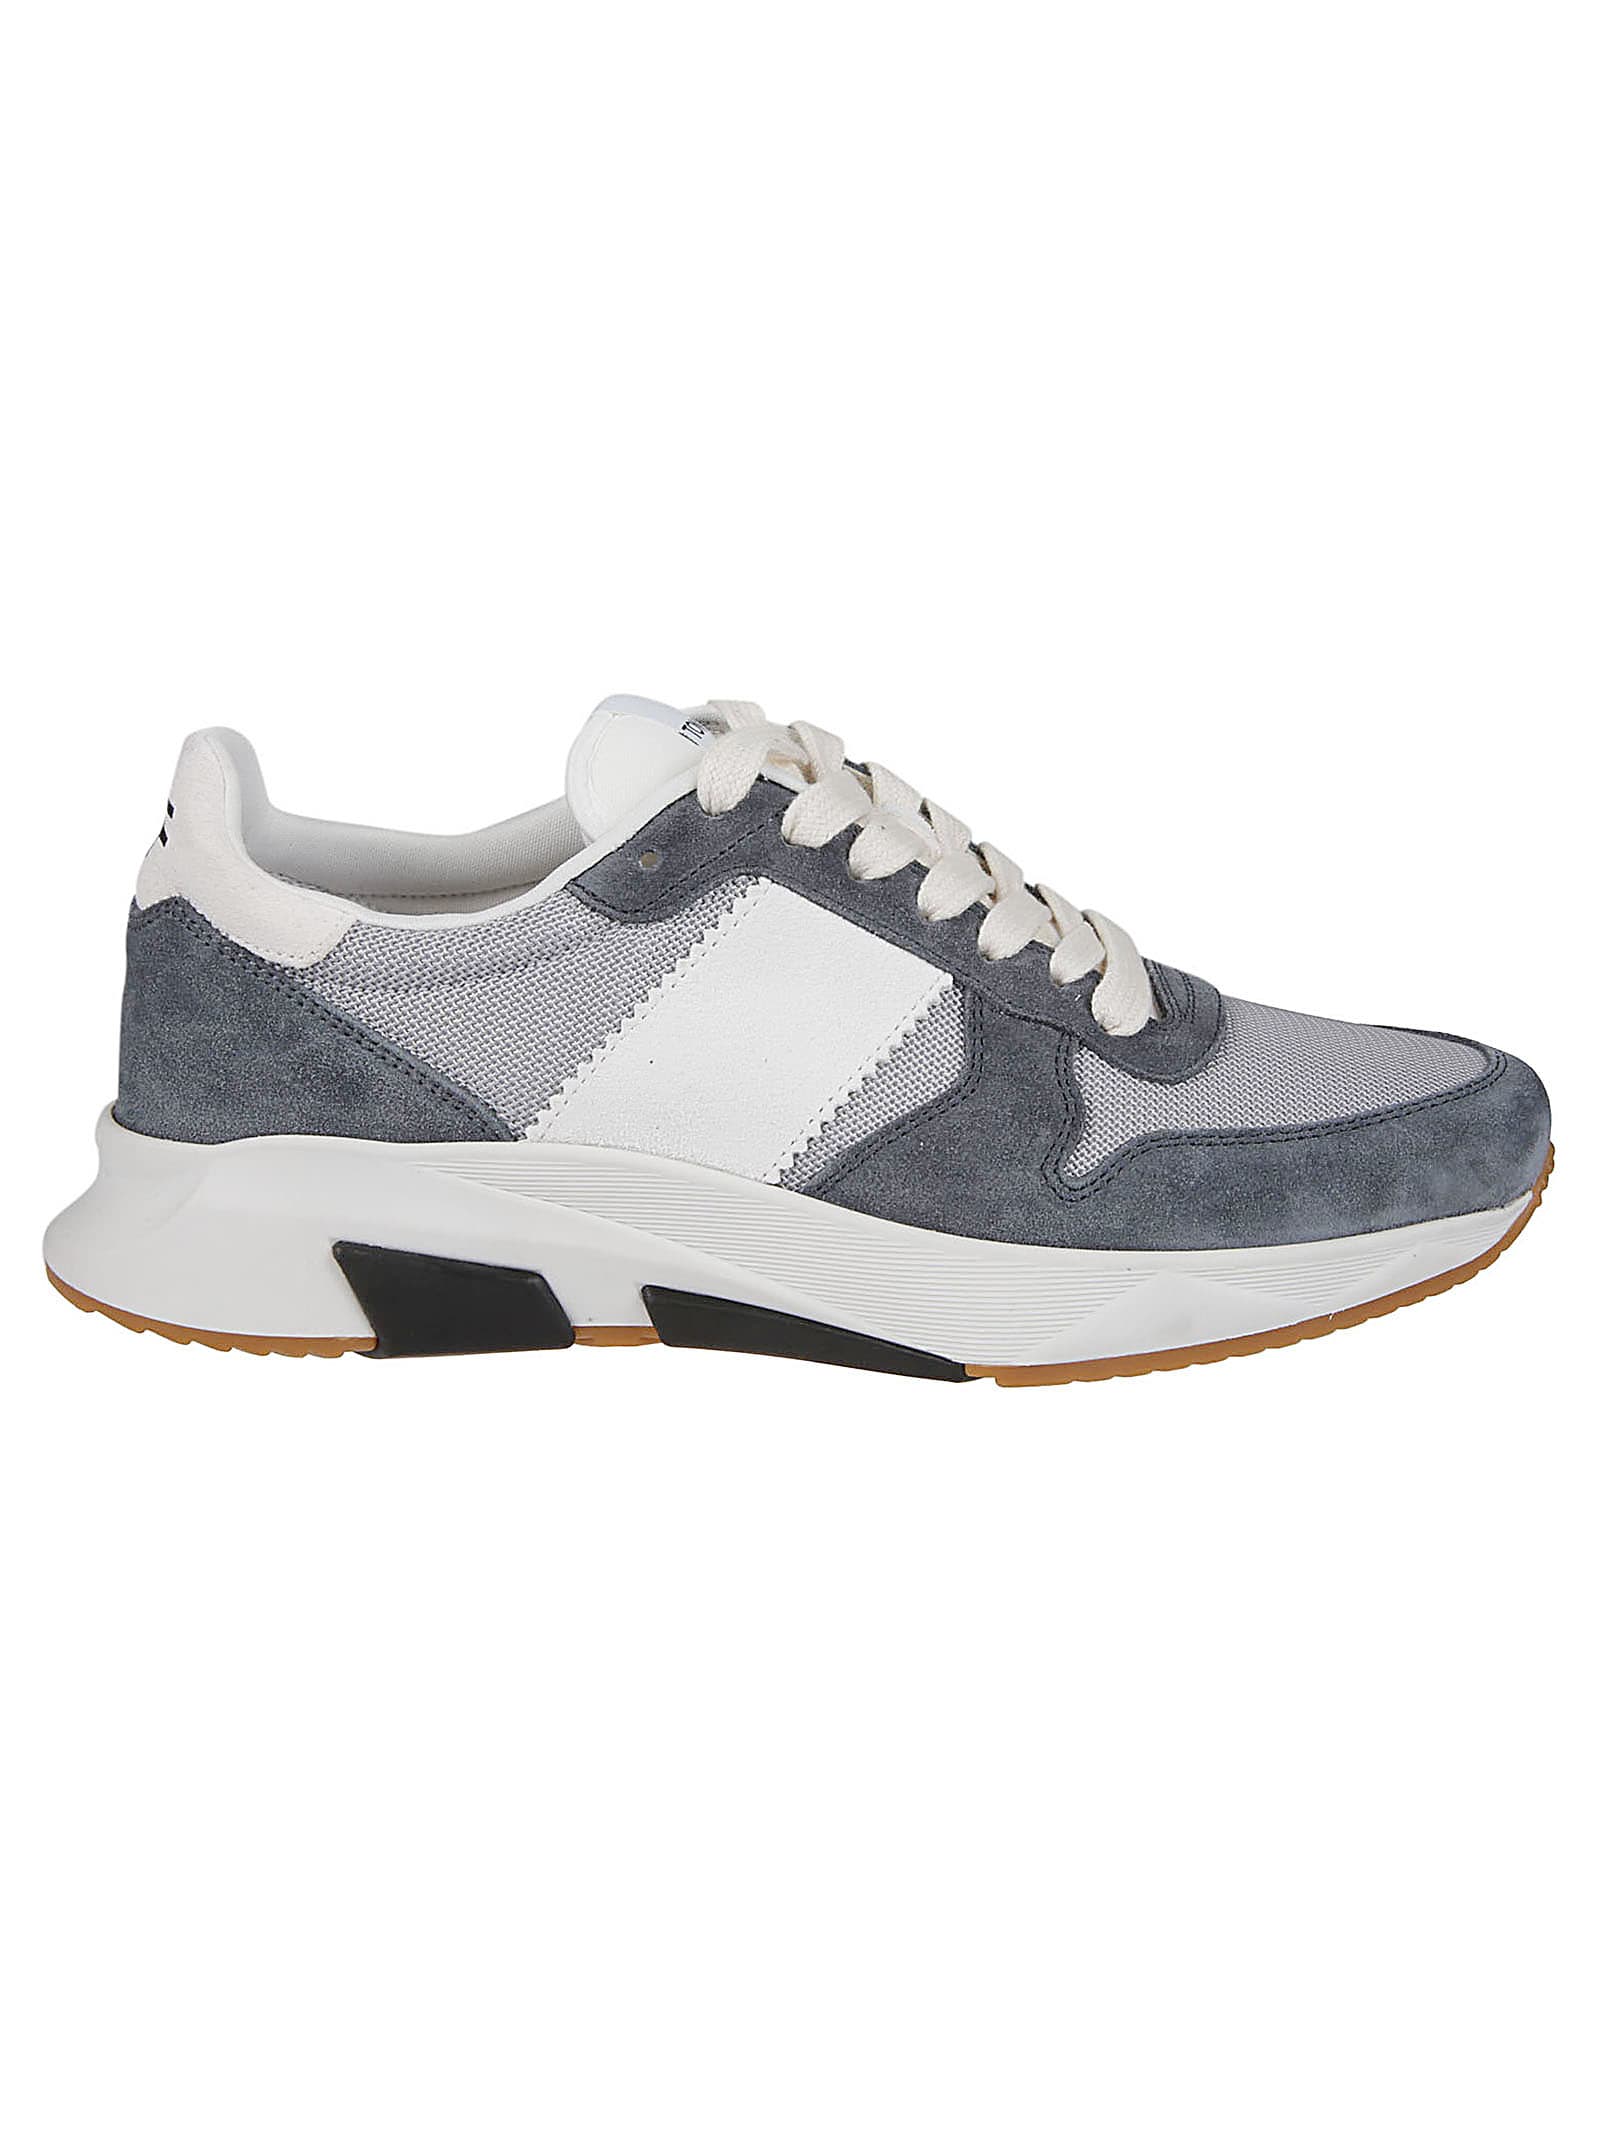 Tom Ford Jago Low Top Sneakers In Silver/petrol Blue/white